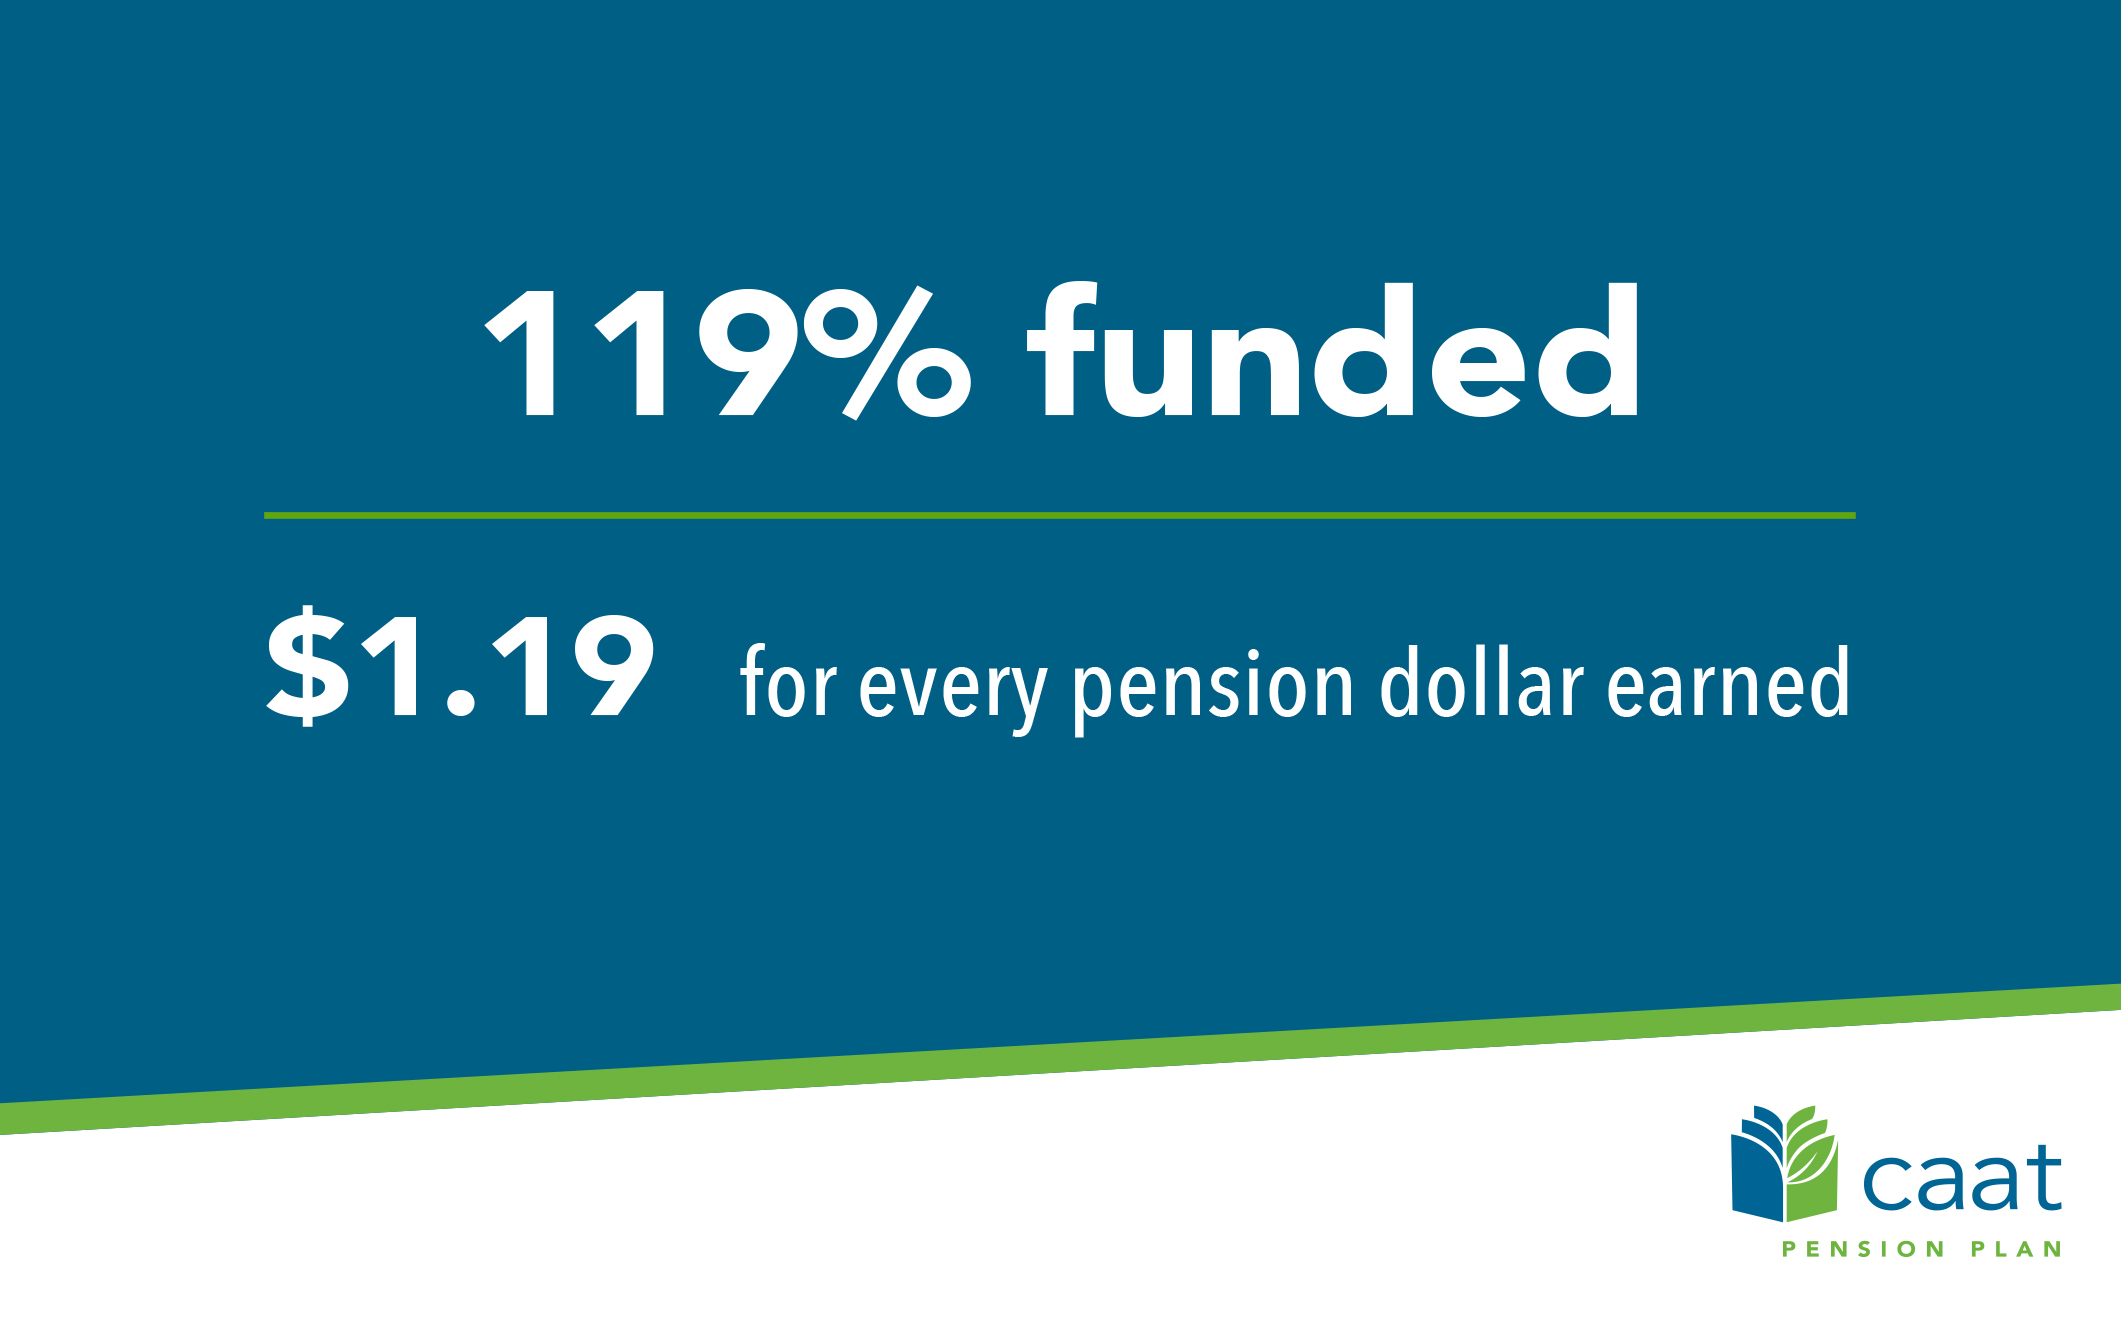 119% funded. $1.19 for every pension dollar earned.